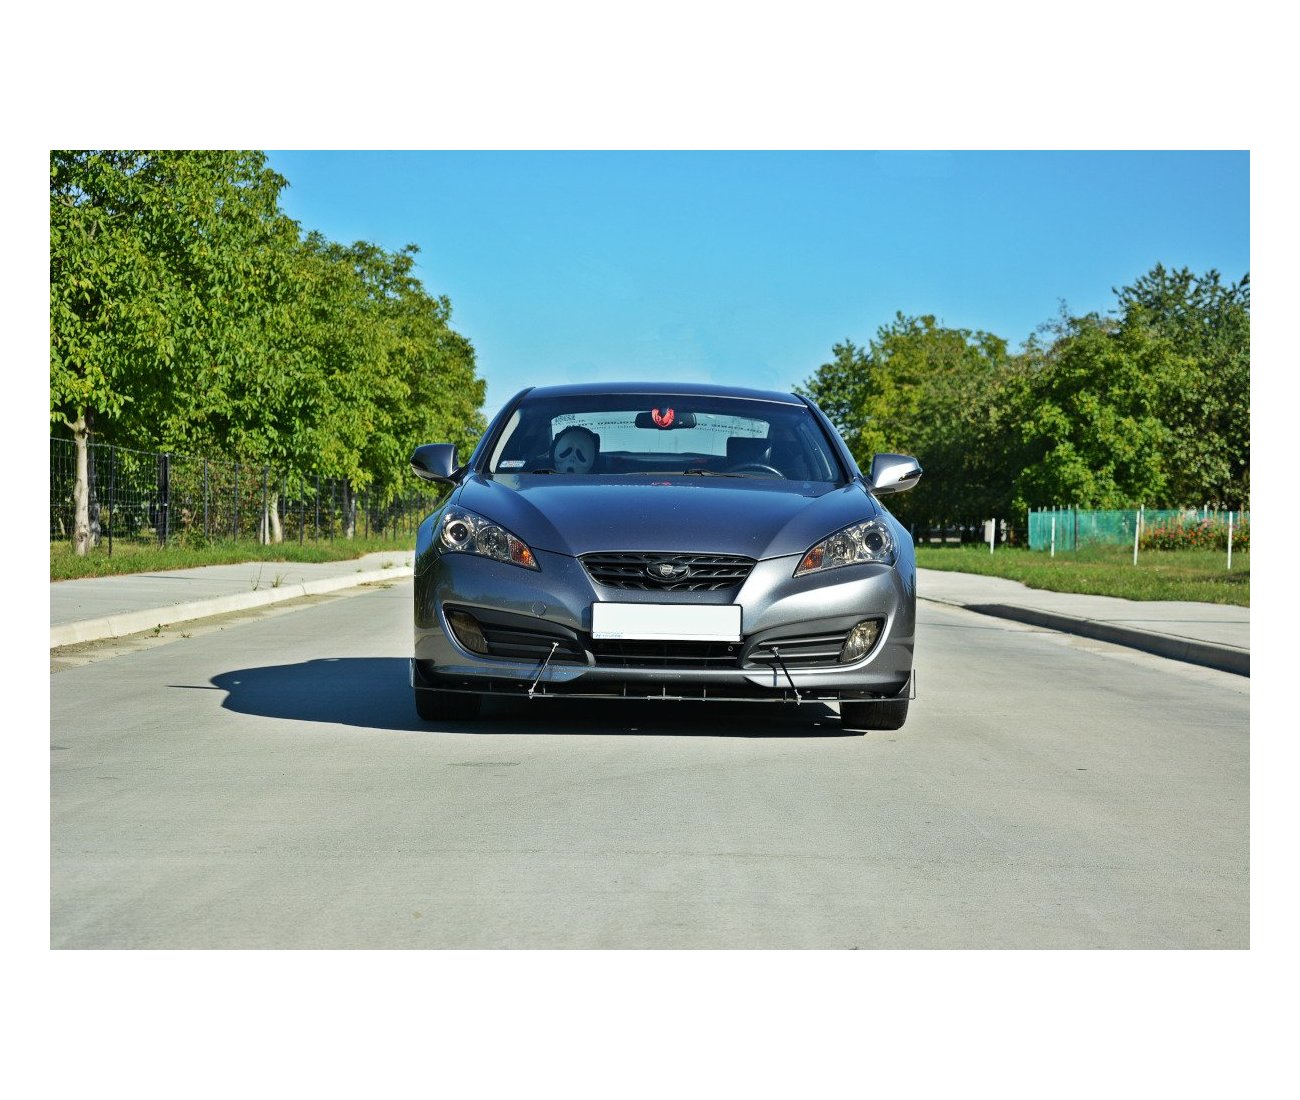 Racing Cup spoiler lip front approach for Hyundai Genesis Coupe